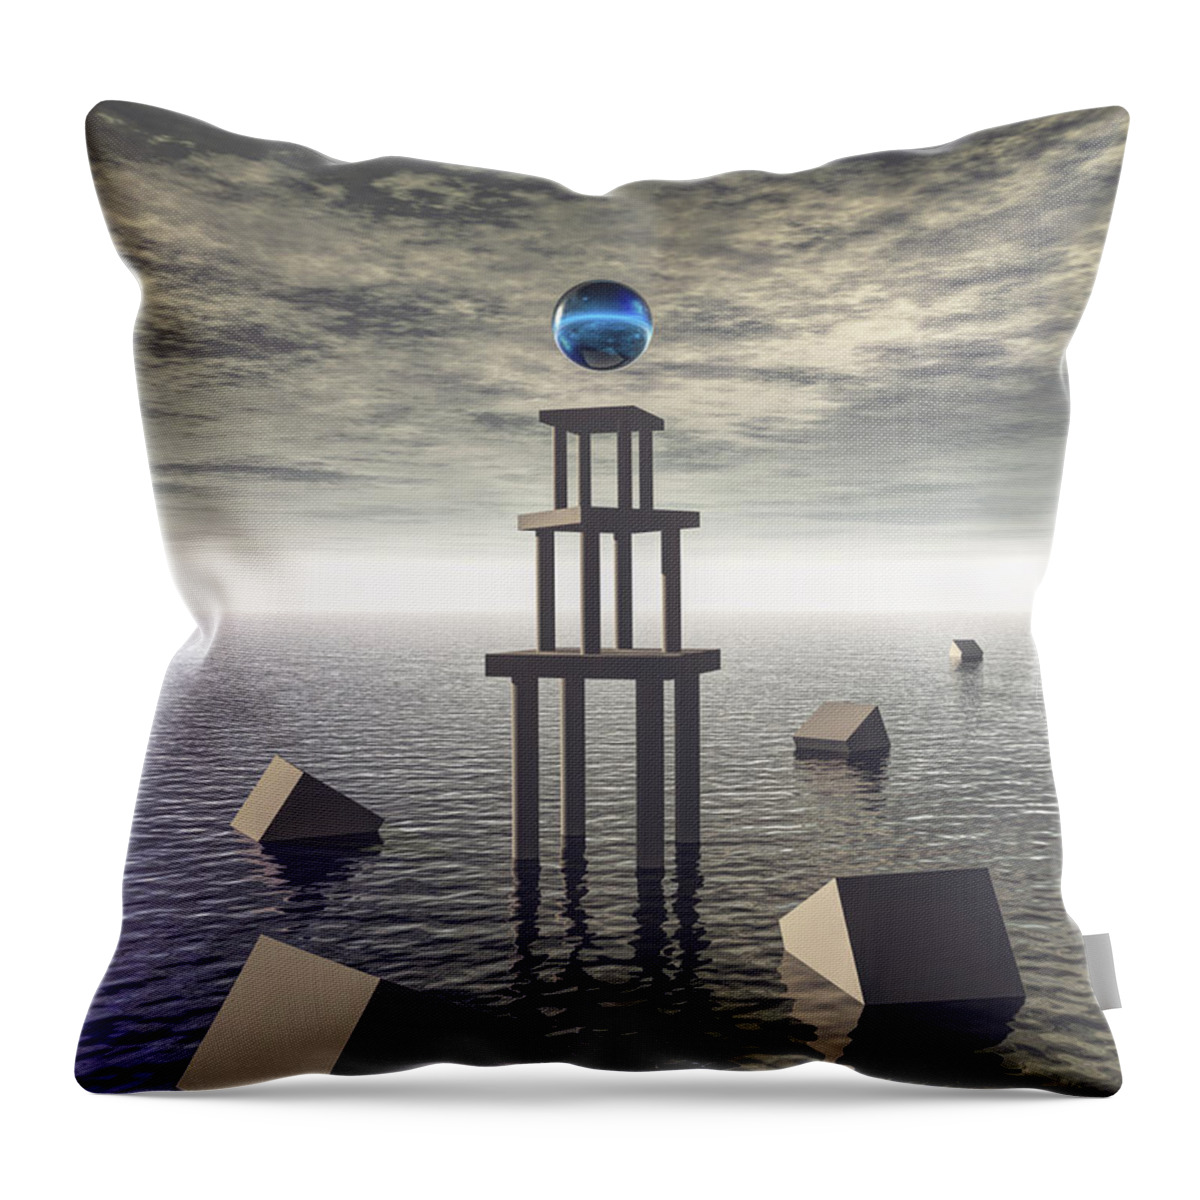 Structure Throw Pillow featuring the digital art Mysterious Tower At Sea by Phil Perkins